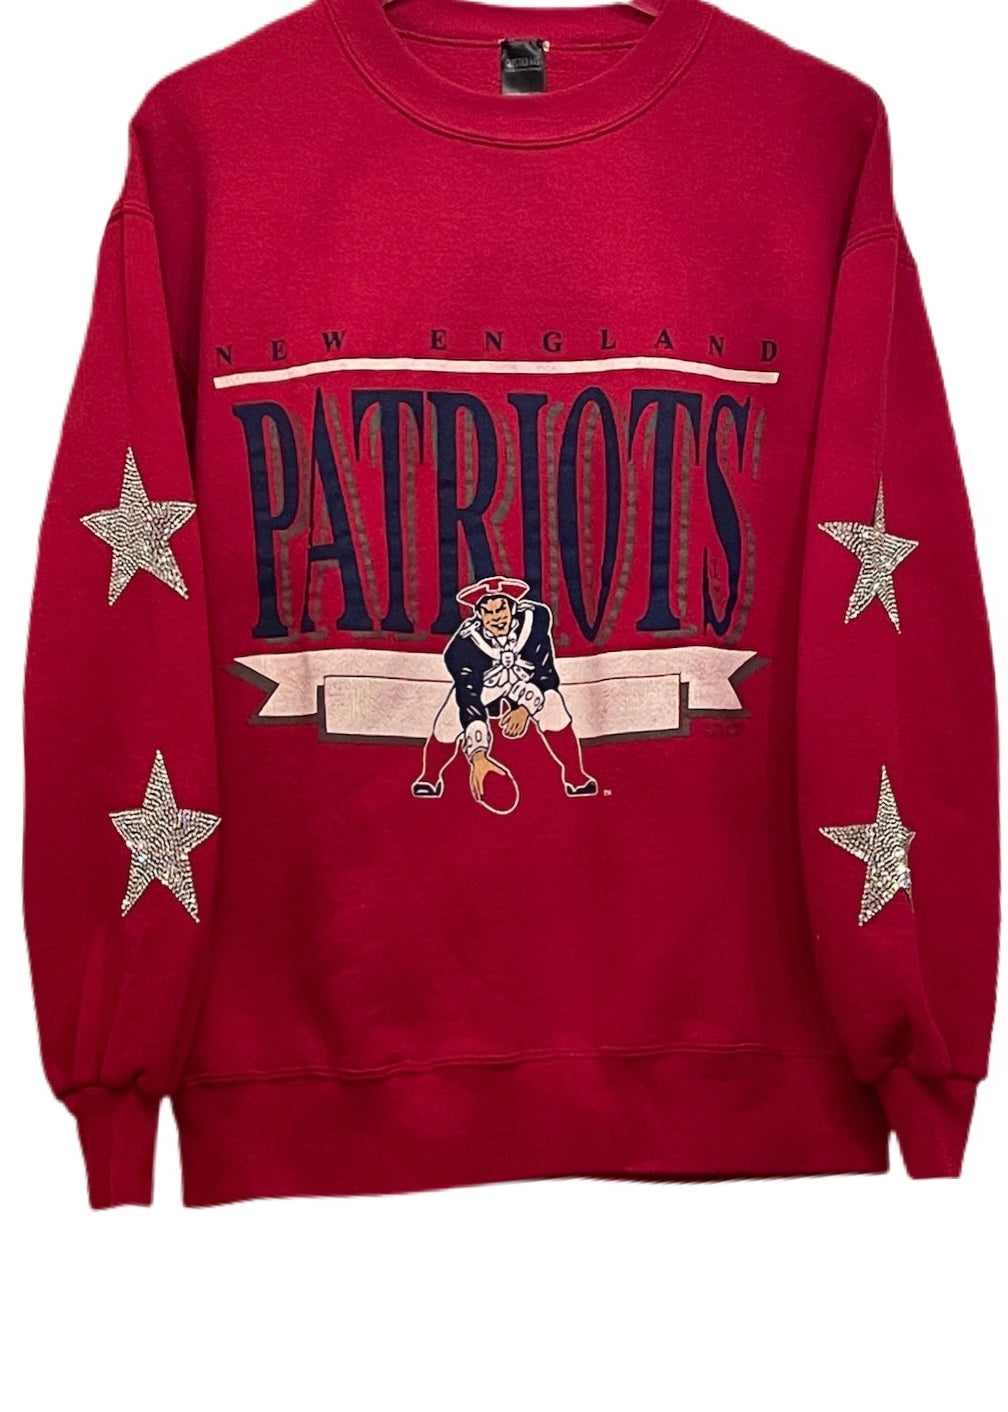 New England Patriots, NFL One of a KIND Vintage Sweatshirt with Crystal Star Design